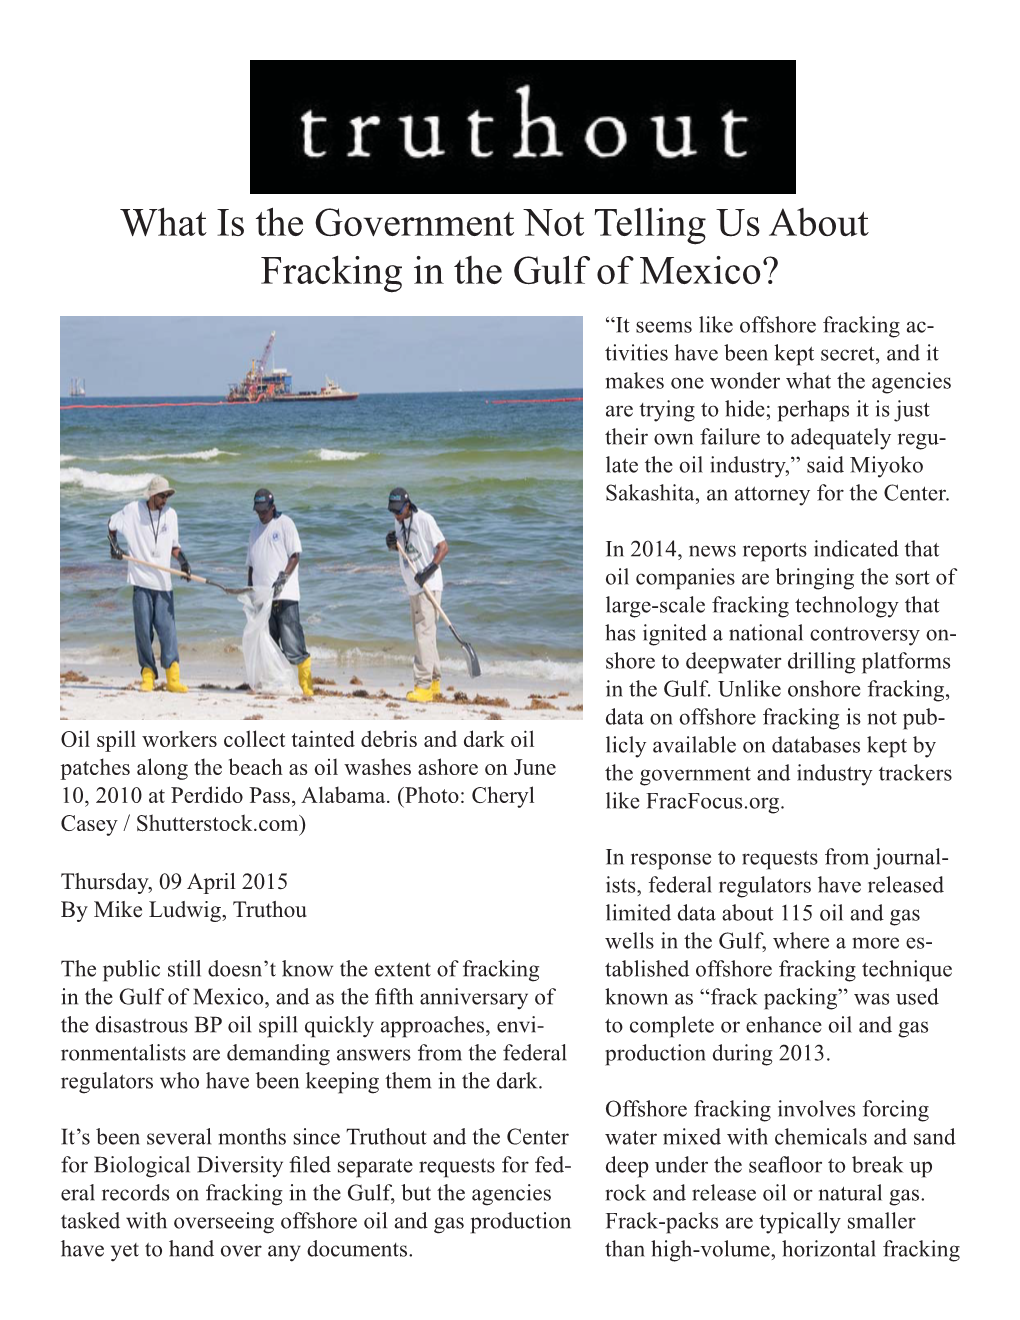 What Is the Government Not Telling Us About Fracking in the Gulf Of